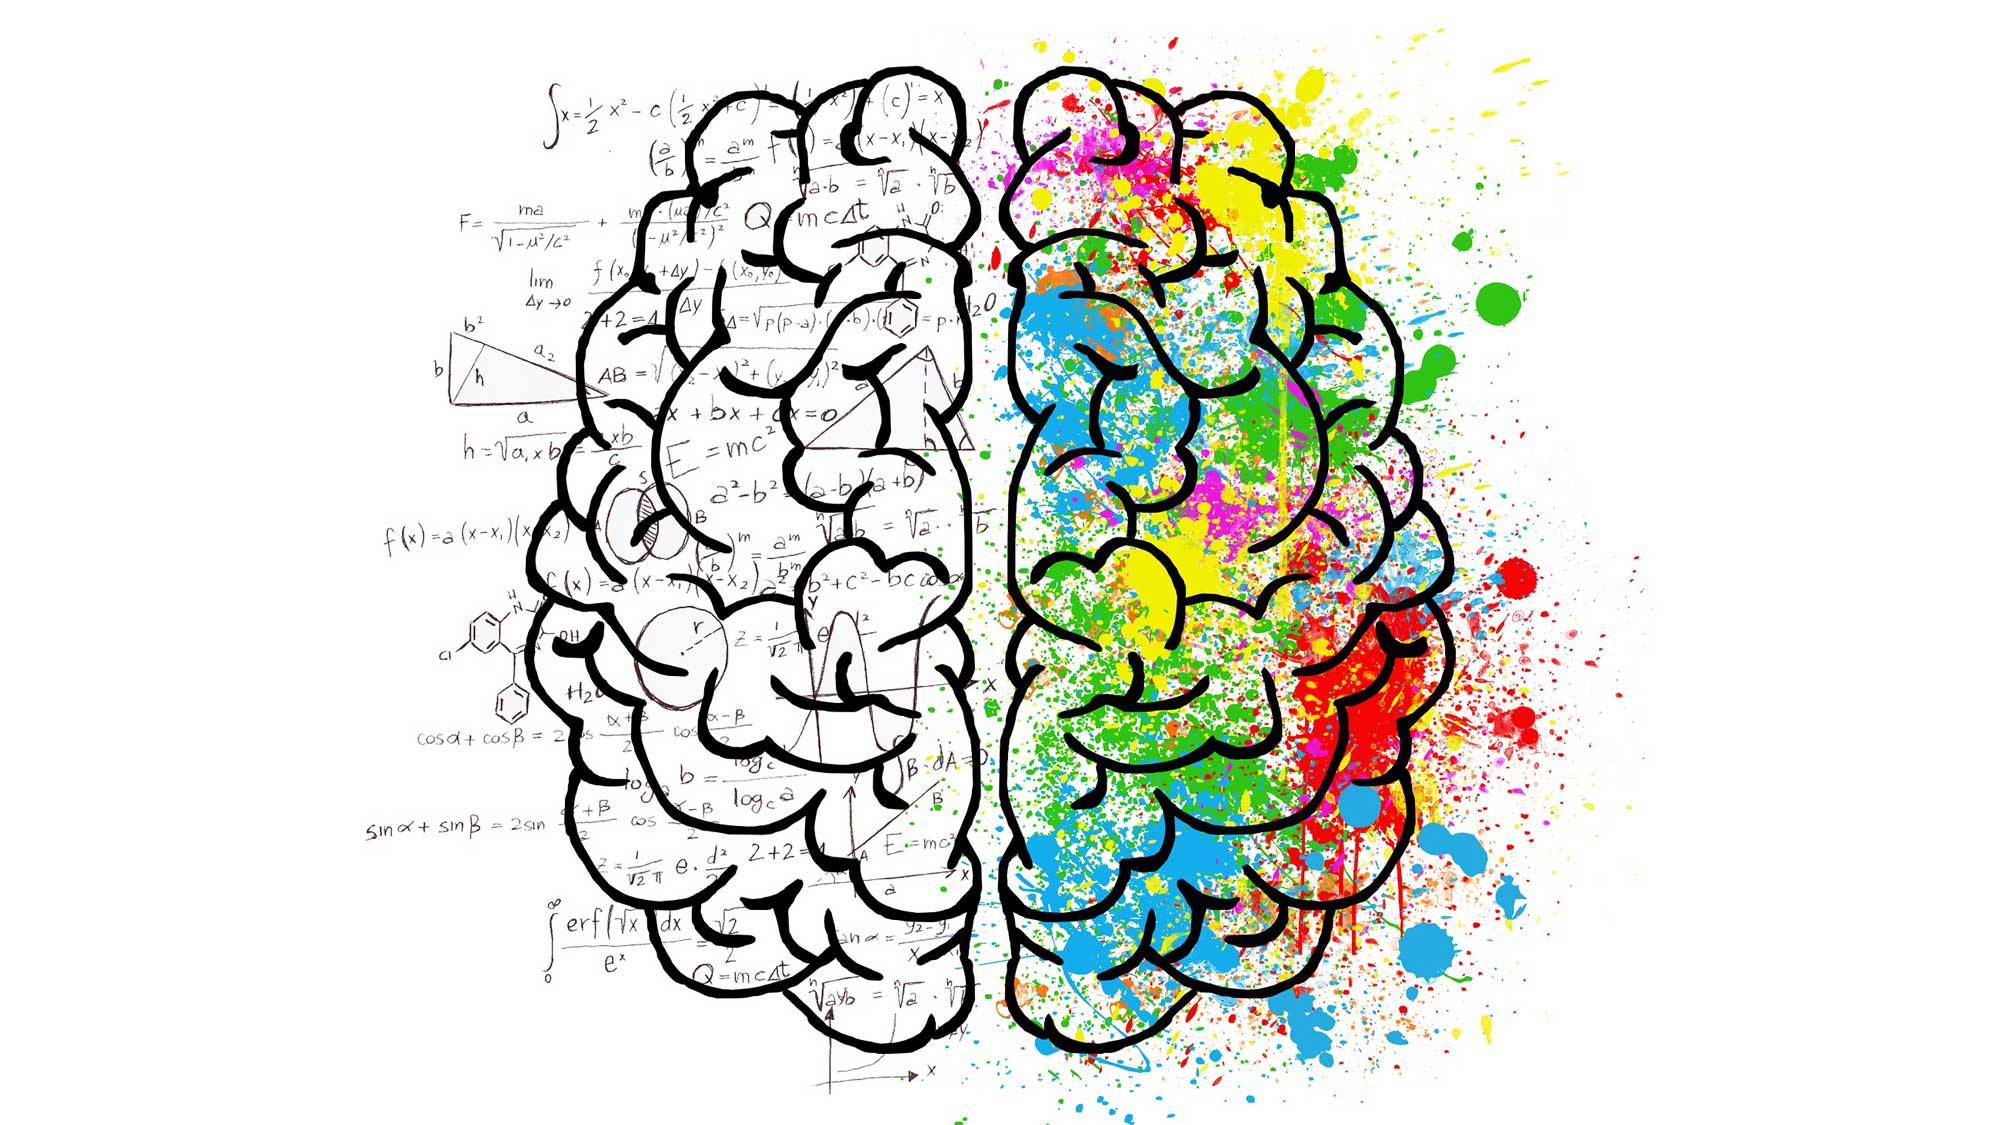 Graphic representation of a brain - analytical right and creative left